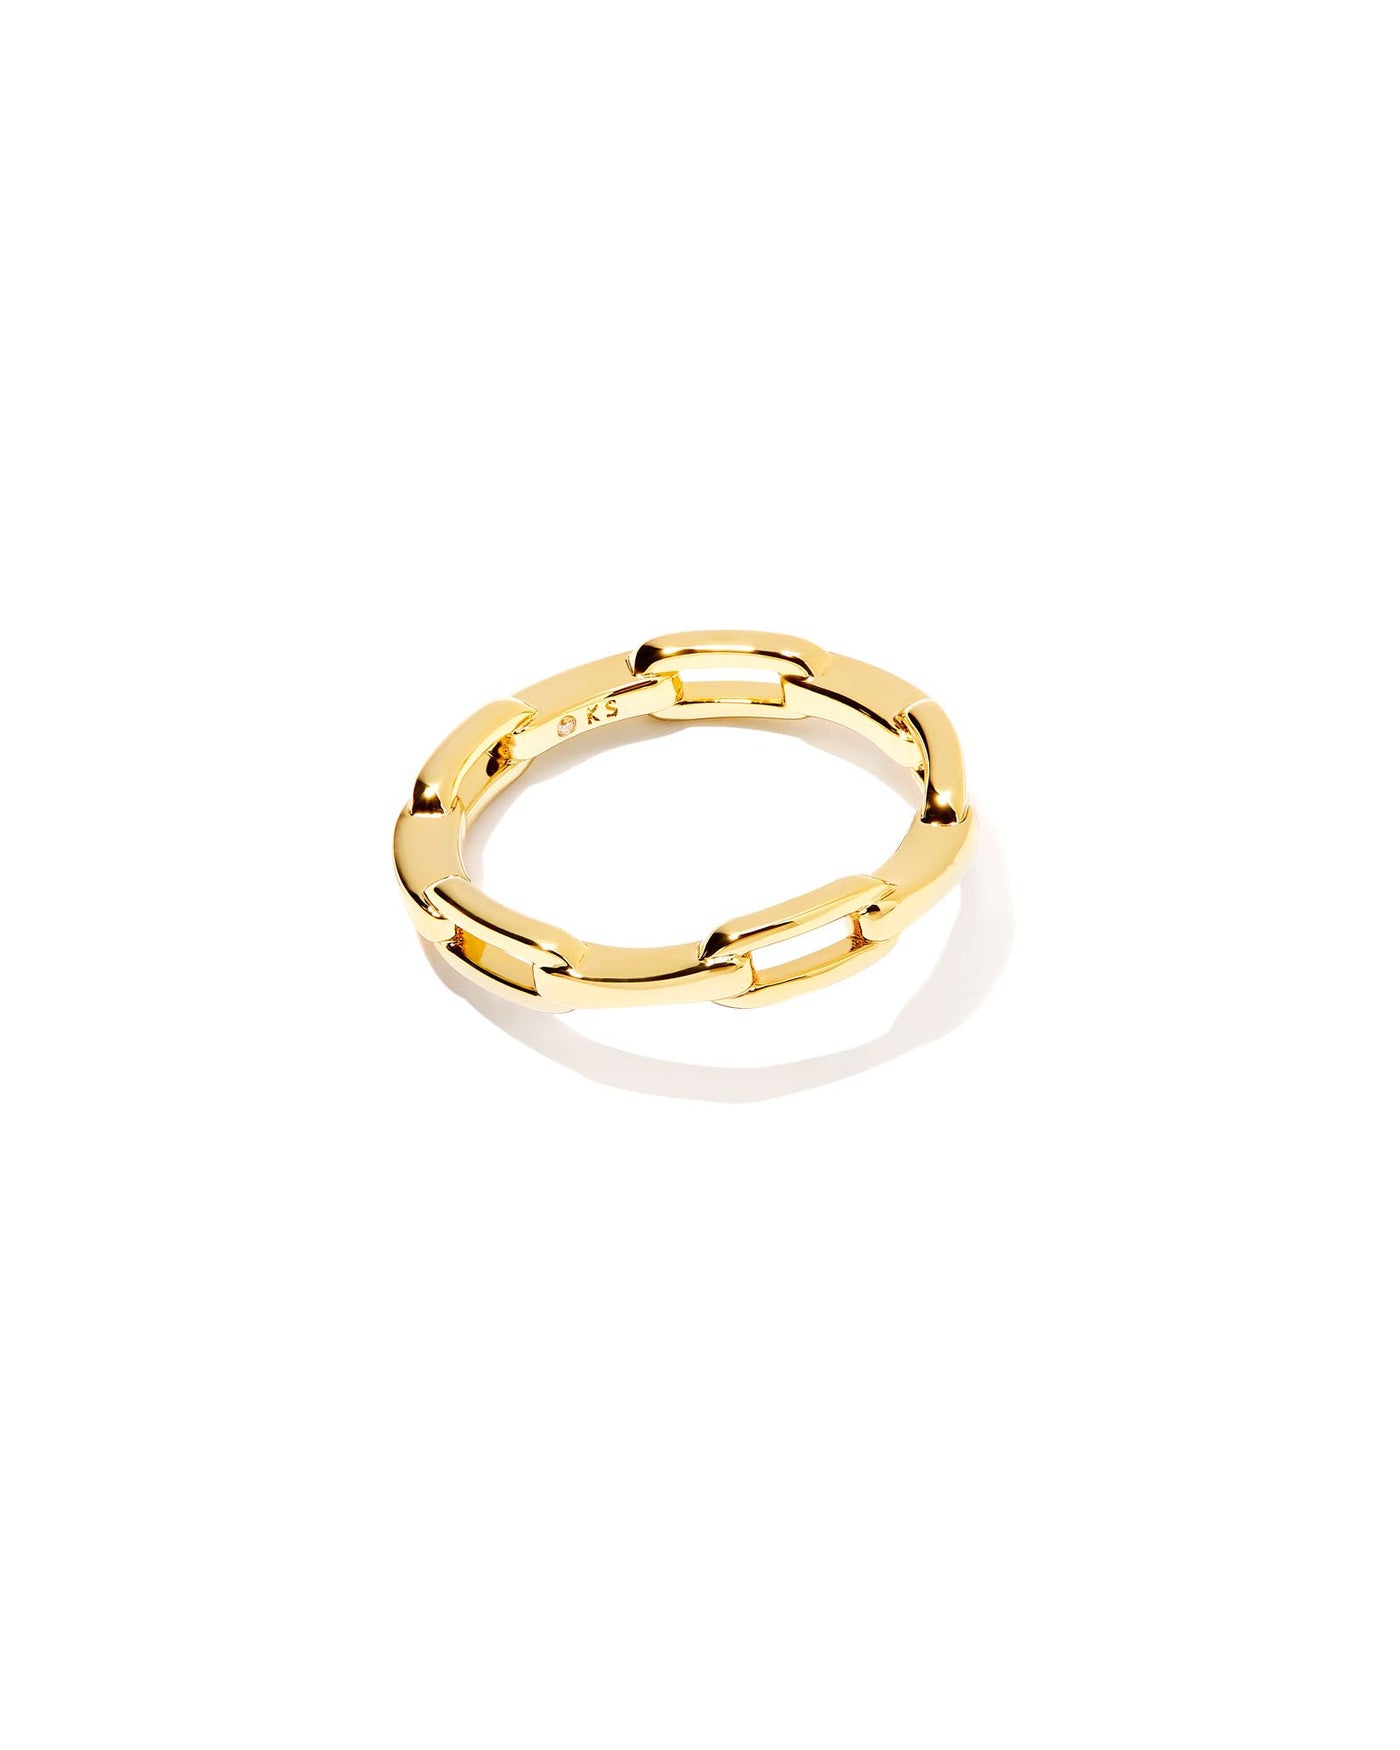 Kendra Scott Andi Band Ring in Gold